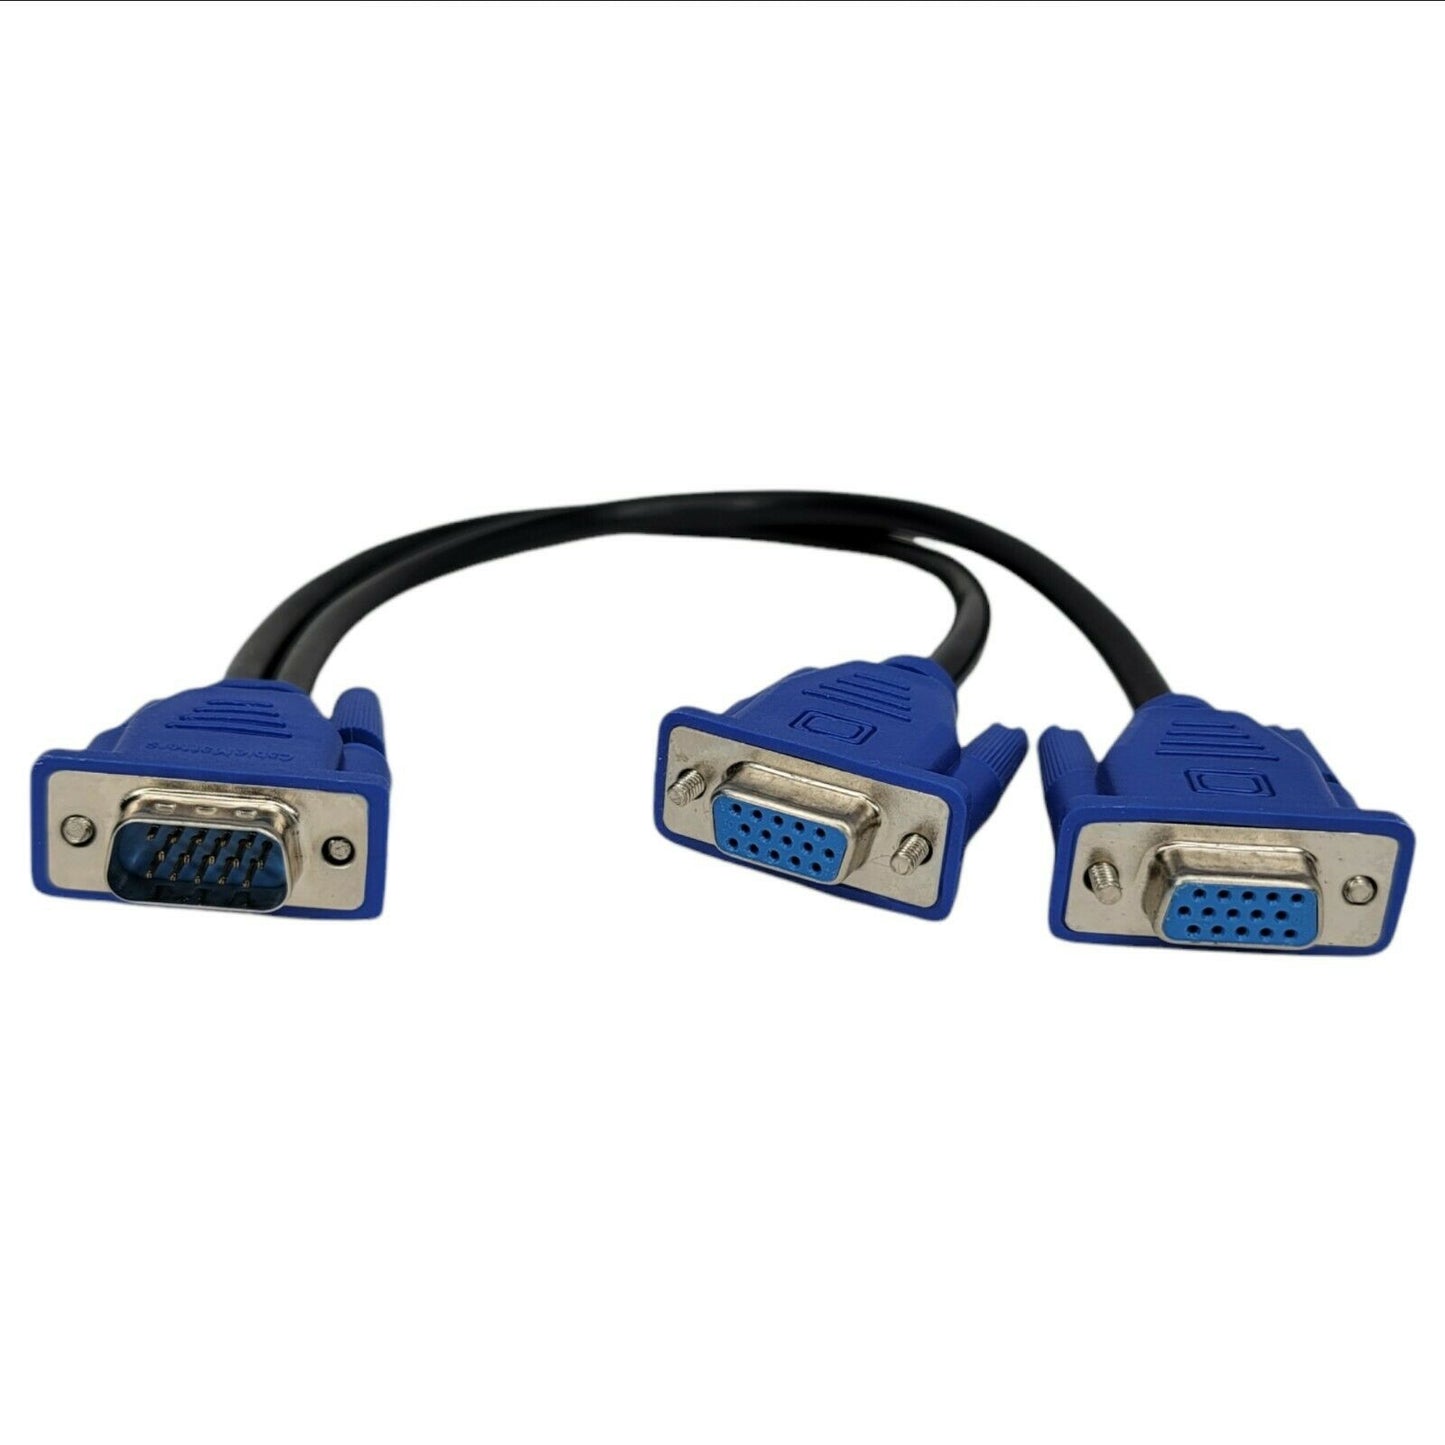 Cable Matters VGA Splitter Cable (VGA Y Cable) for Screen Duplication 1'